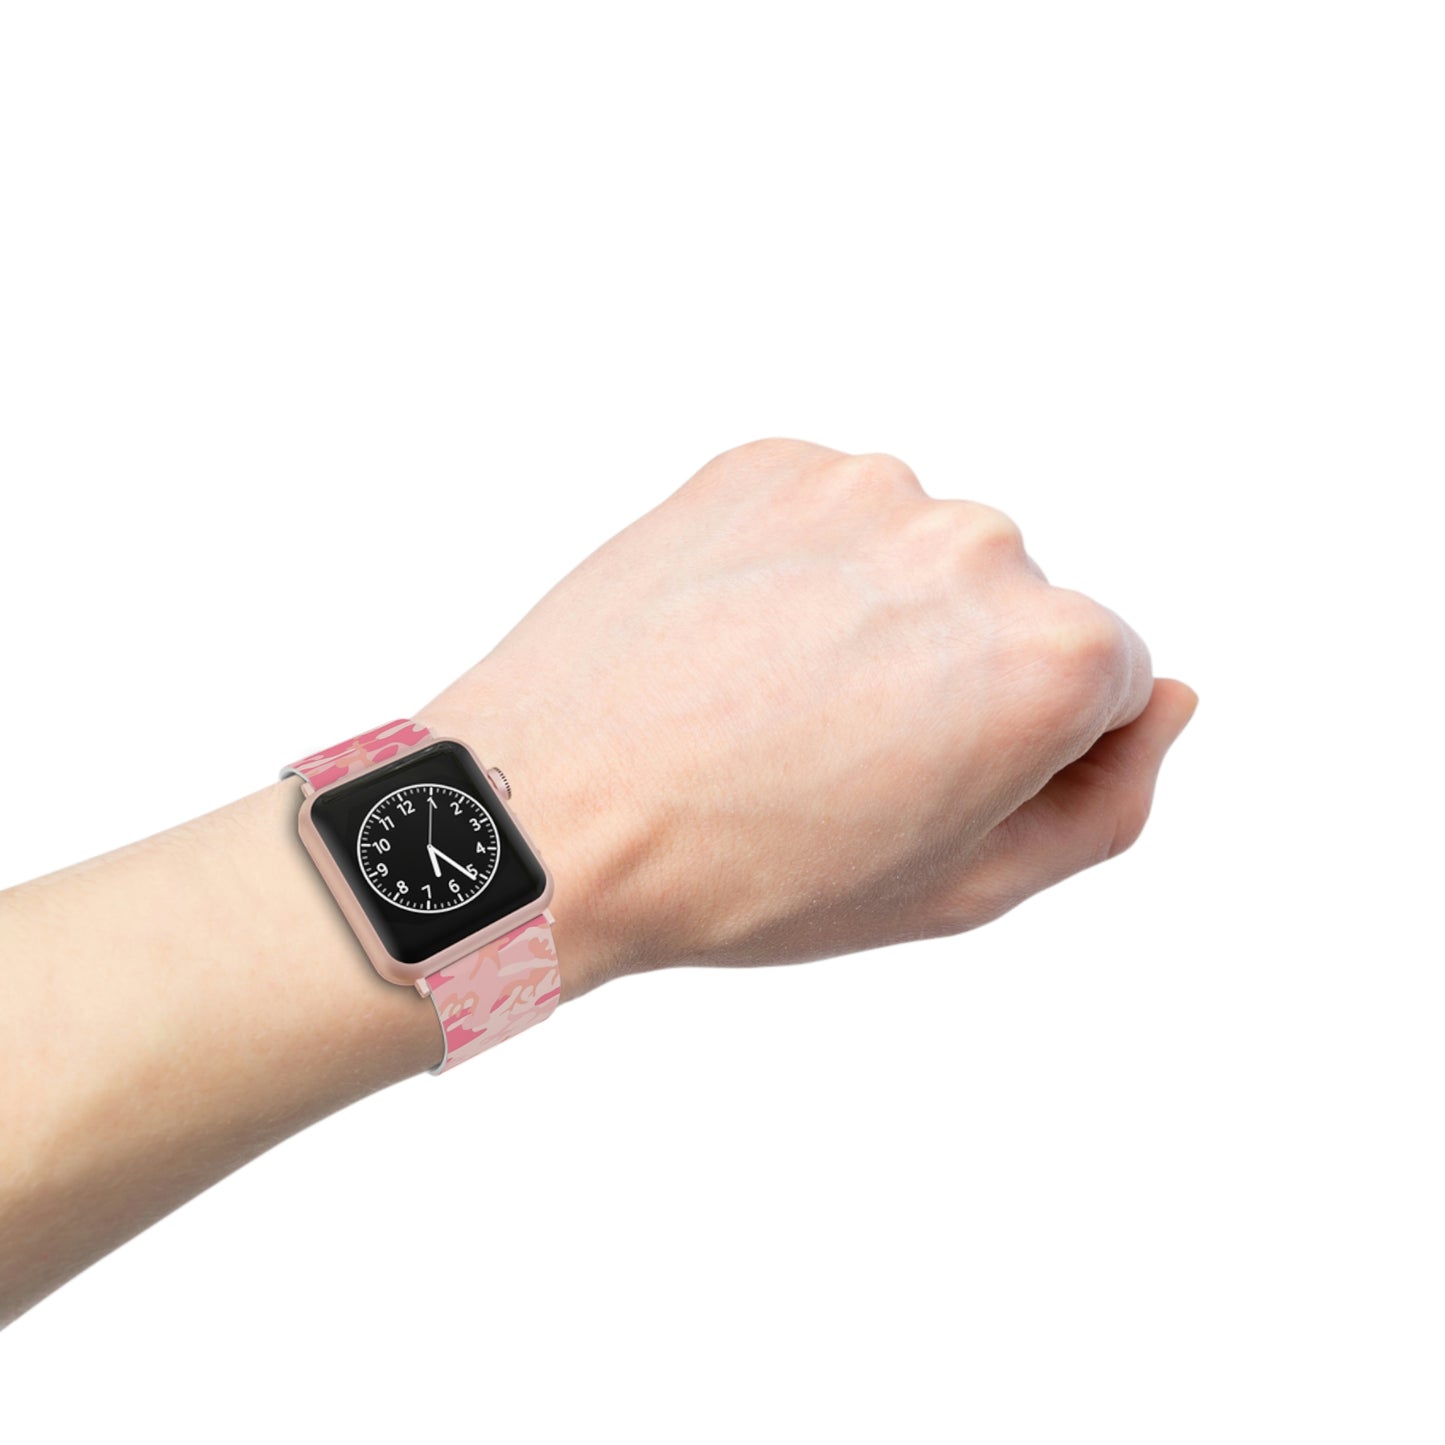 Pink Camo Thermo Elastomer Watch Band for Apple Watch